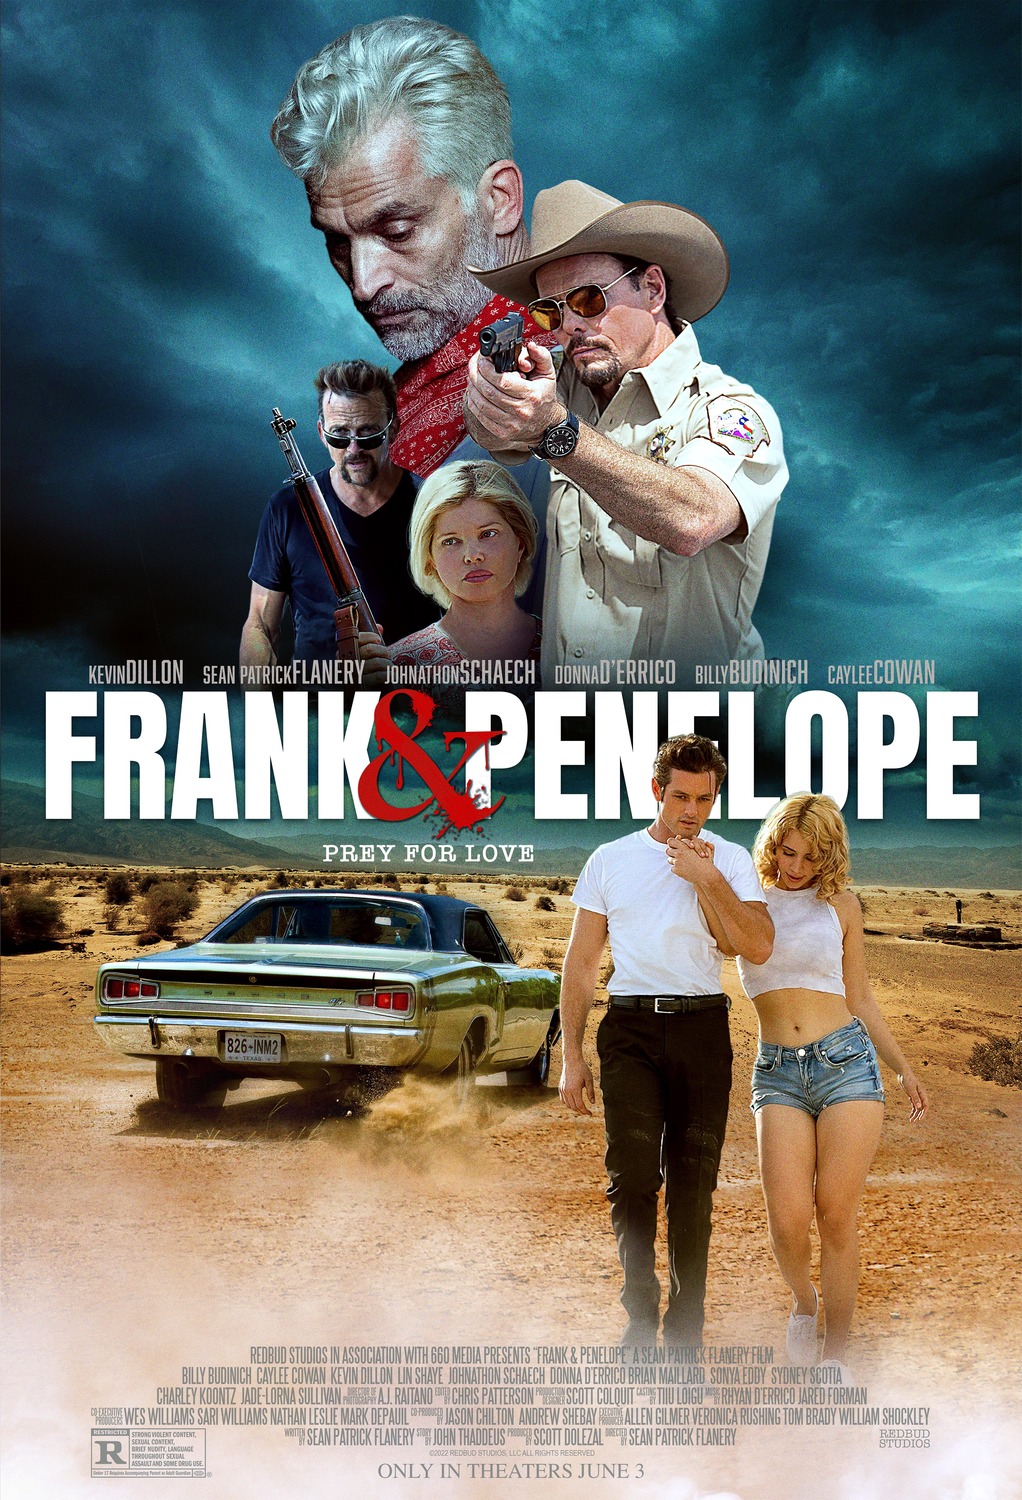 Frank and Penelope - 2022